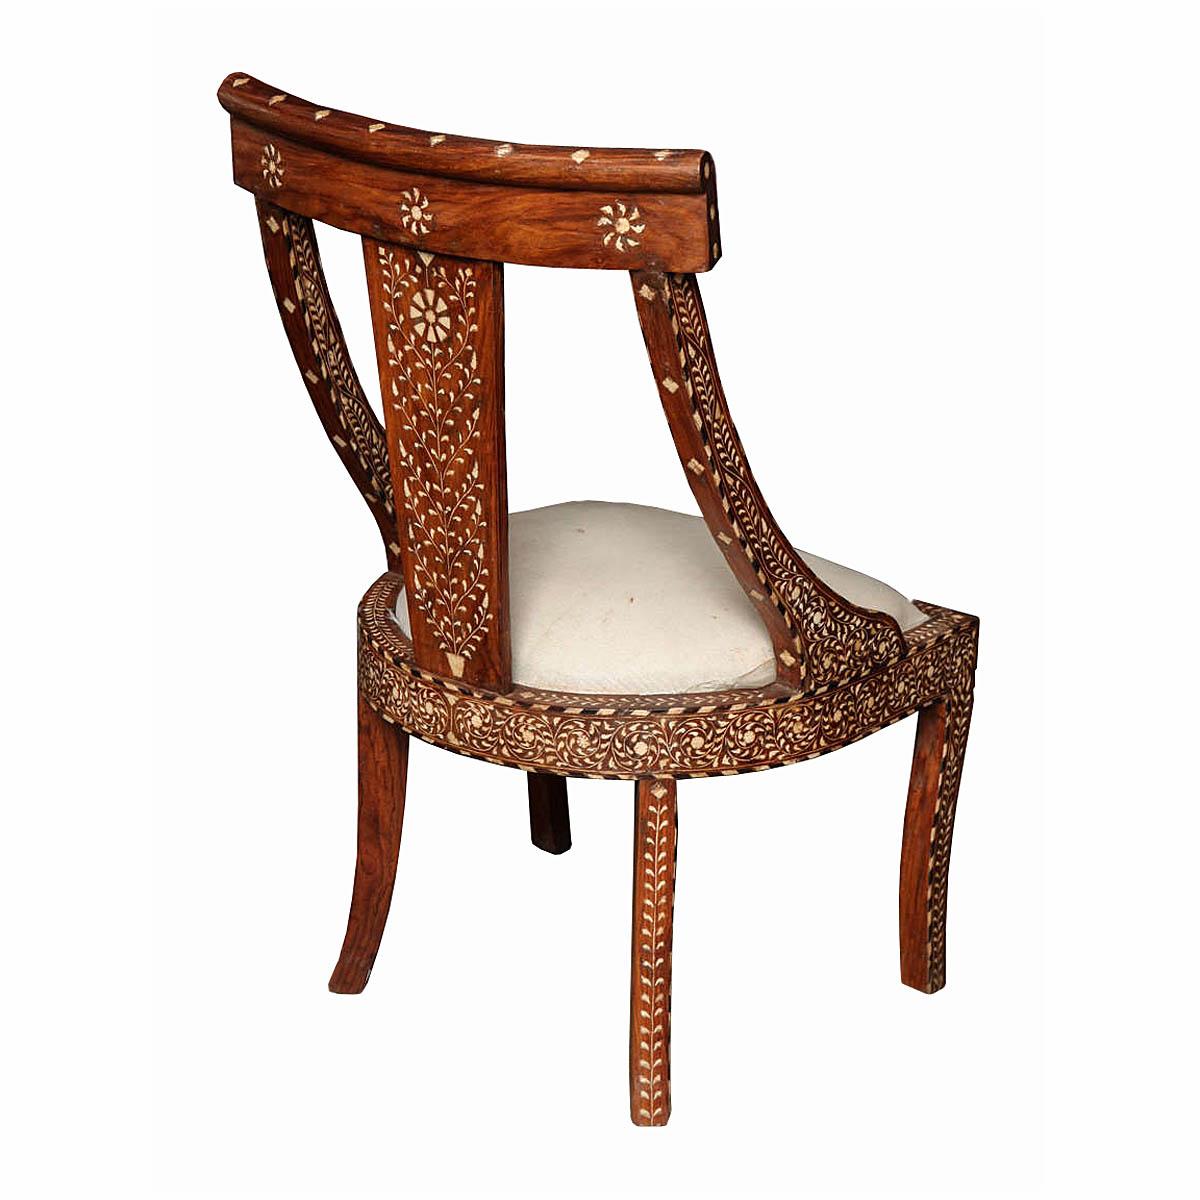 Anglo-Indian Bone-Inlaid Teak Chair from India, Late 20th Century